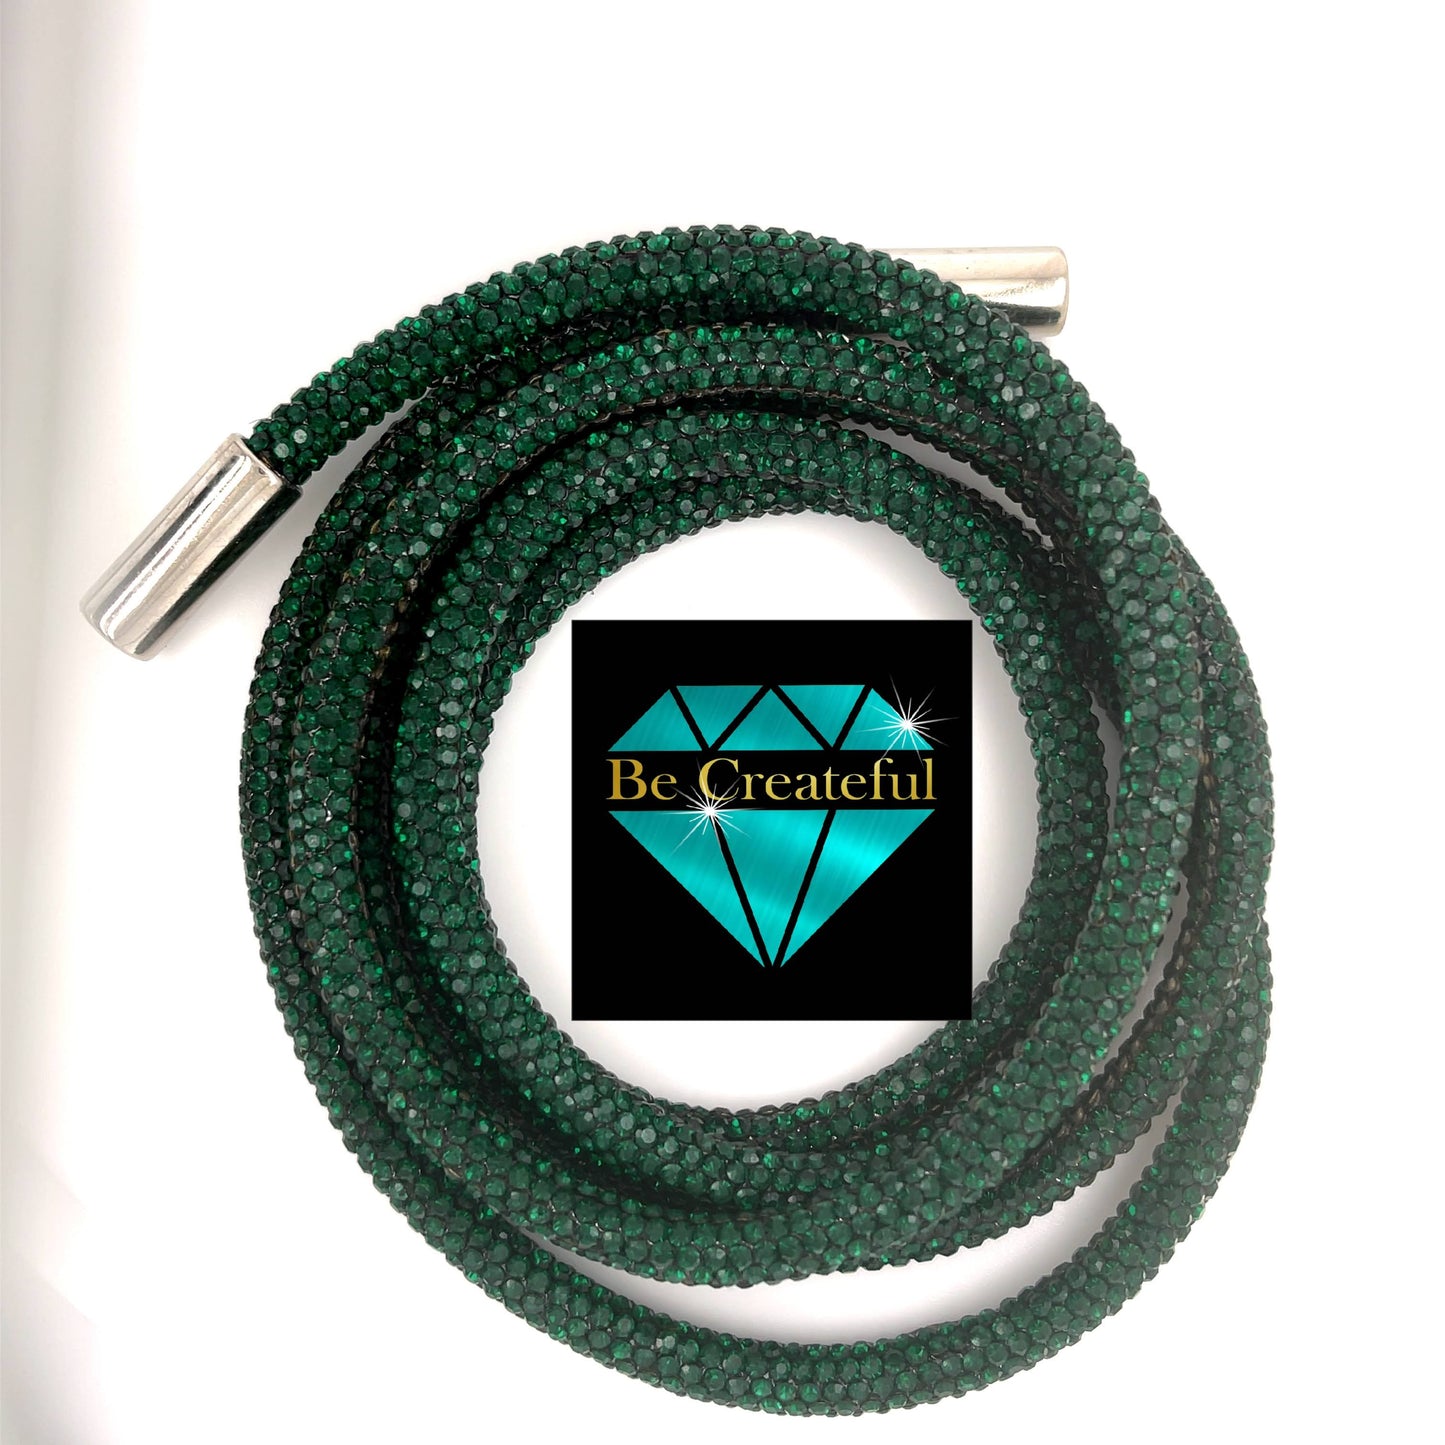 Be Createful Emerald Green Rhinestone Hoodie Strings are the perfect way to glam up your favorite hoodie and accessories!